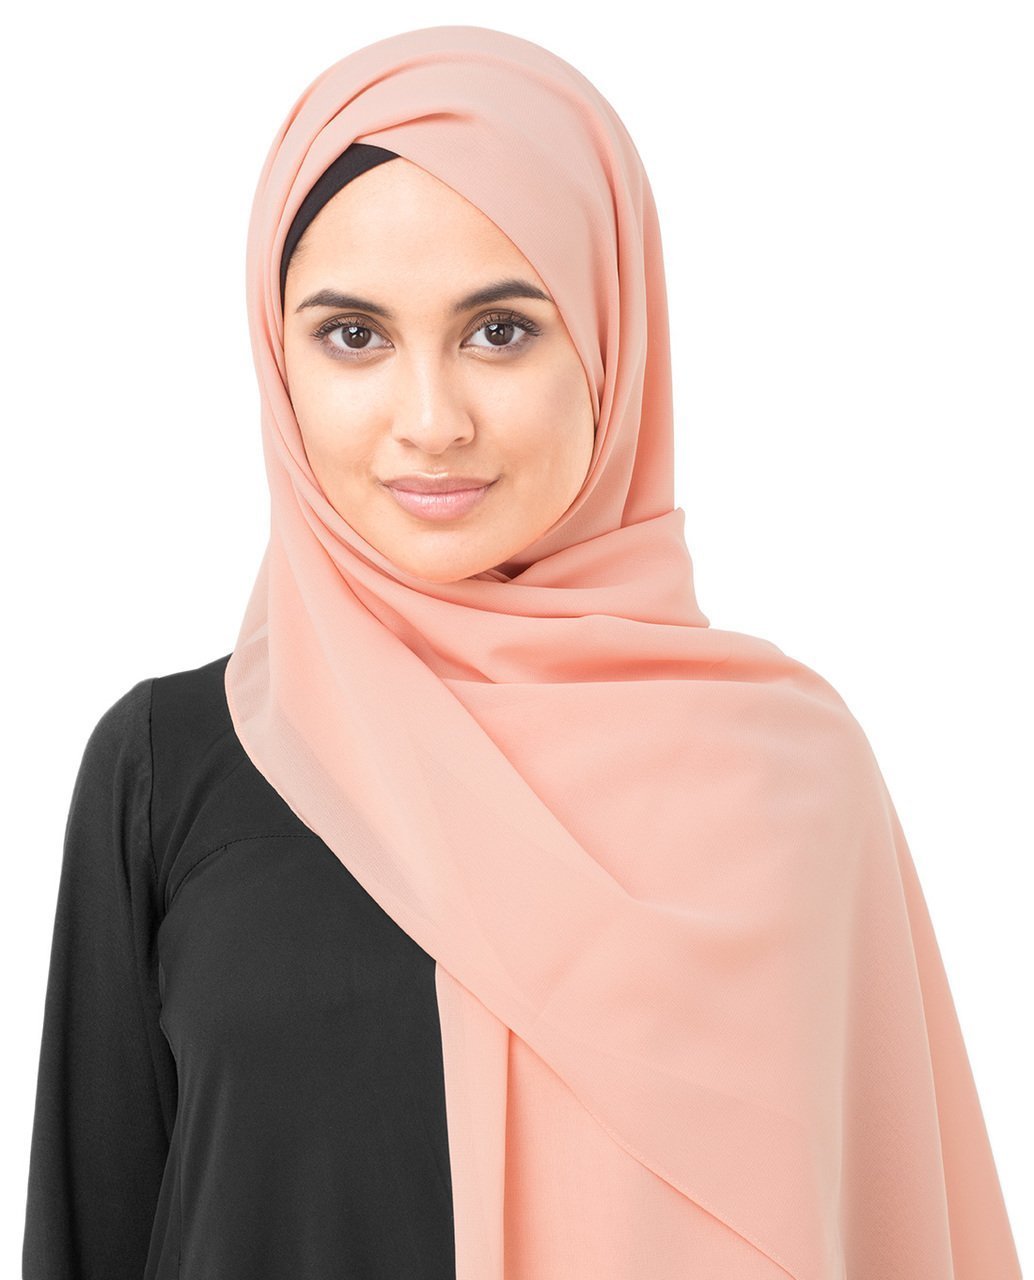 Shop for Georgette Hijab Scarf in Coral Pink Poly - ModestPath.com